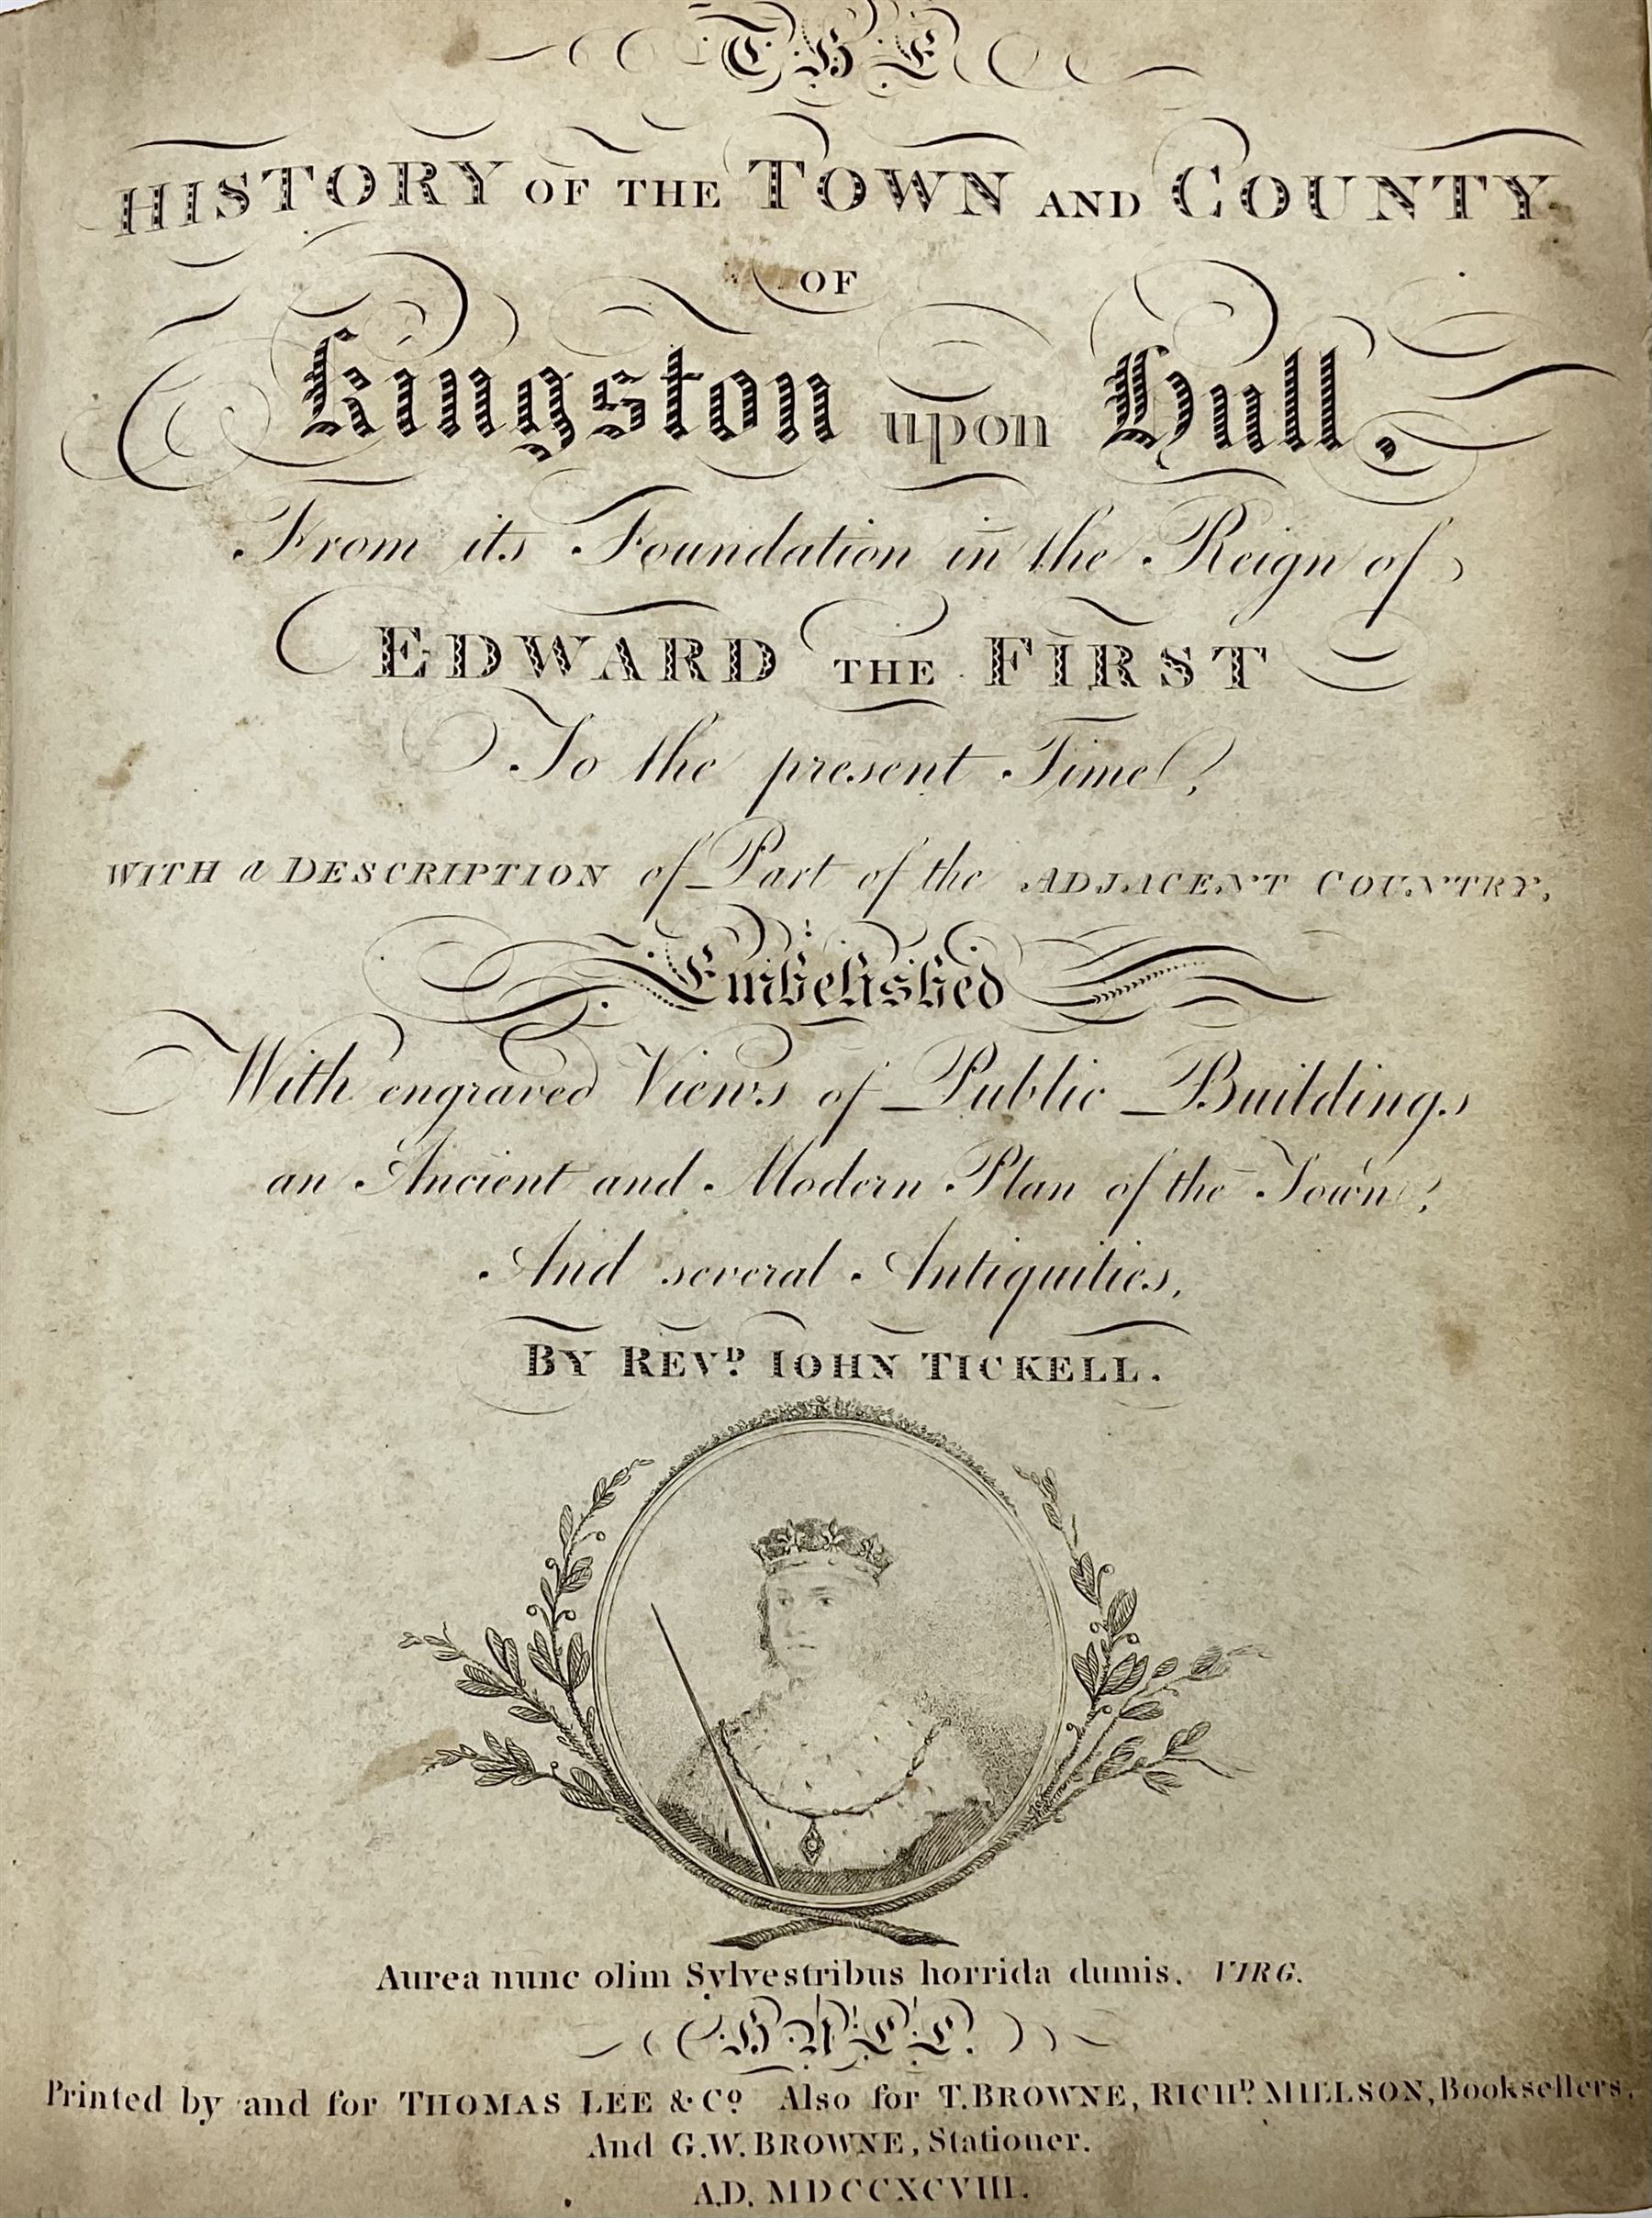 Tickell Rev. John: History of the Town and County of Kingston-upon-Hull From its Foundation in the R